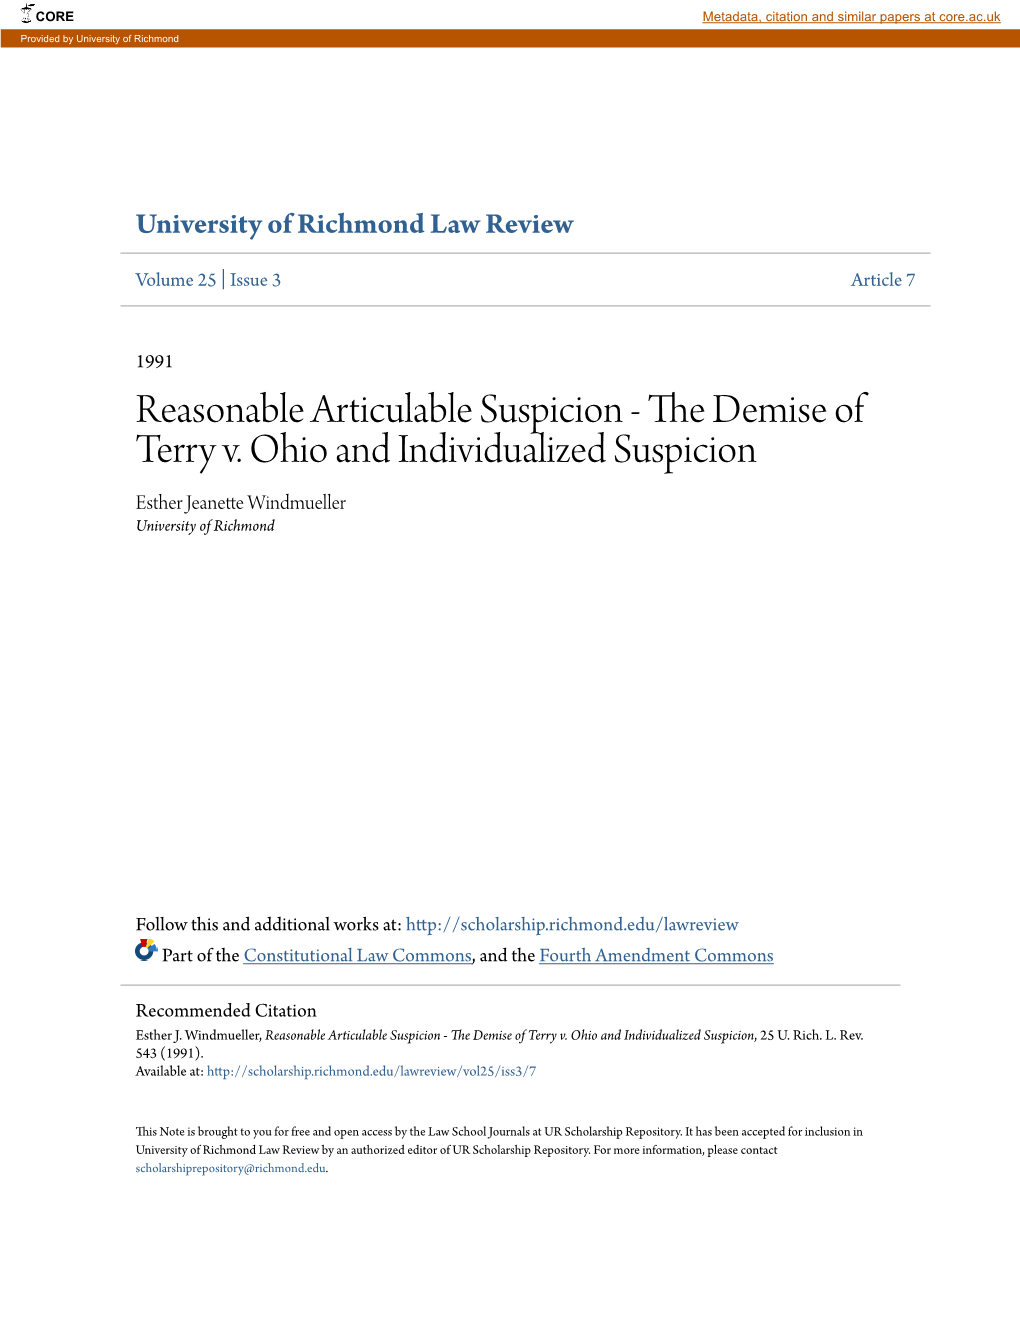 Reasonable Articulable Suspicion - the Ed Mise of Terry V